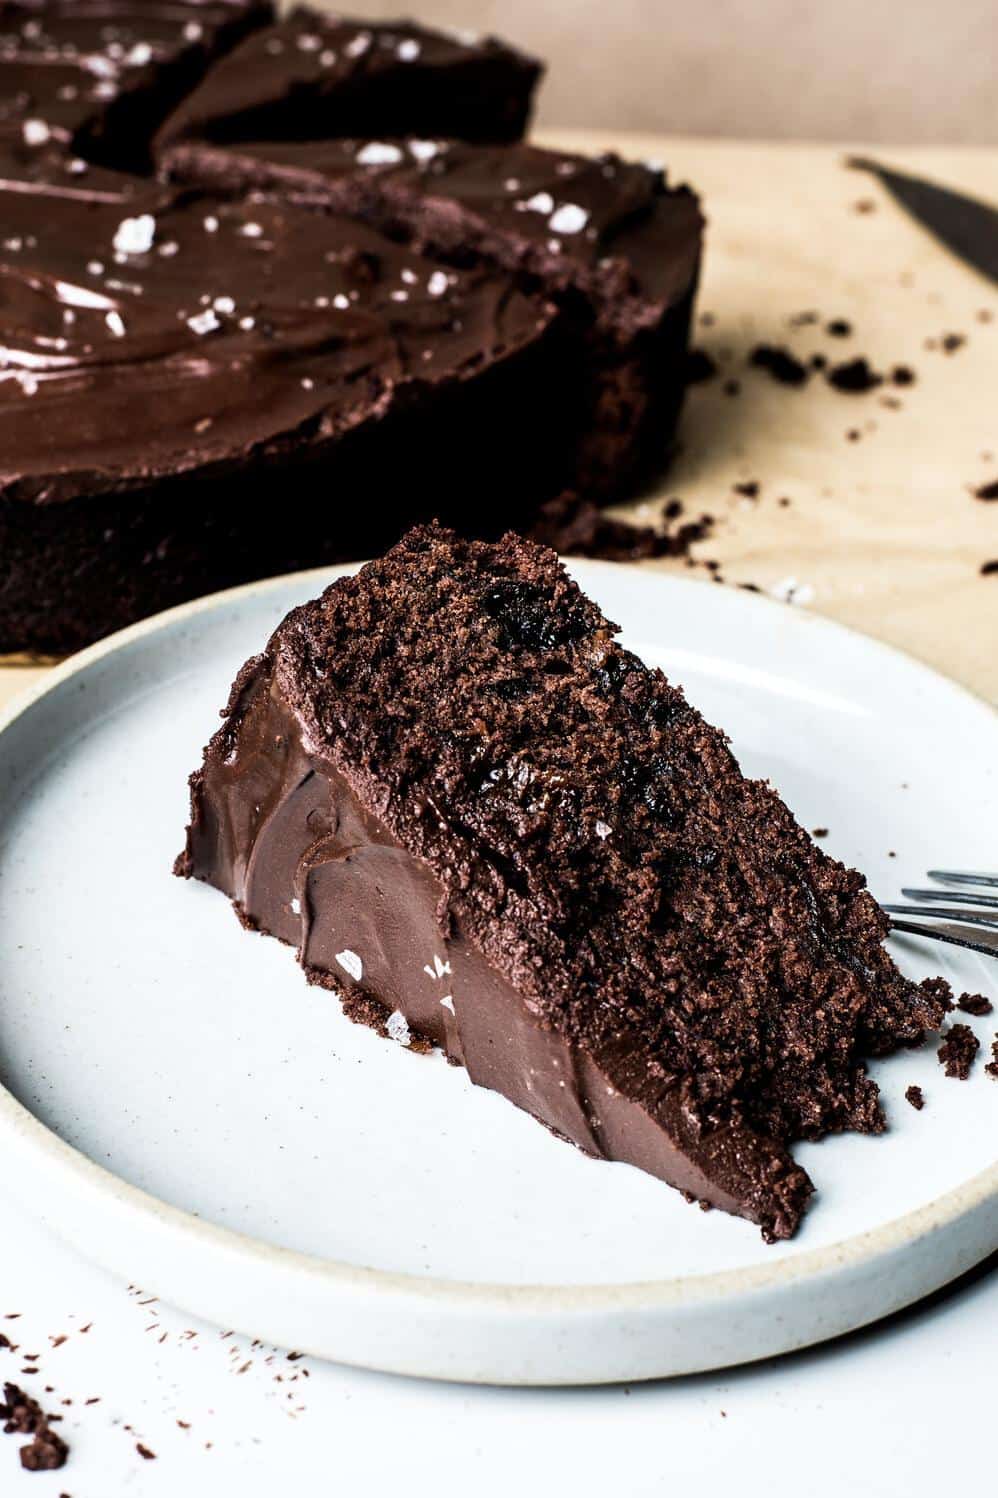  Every bite is a burst of chocolatey goodness paired with the sweetness of prunes.